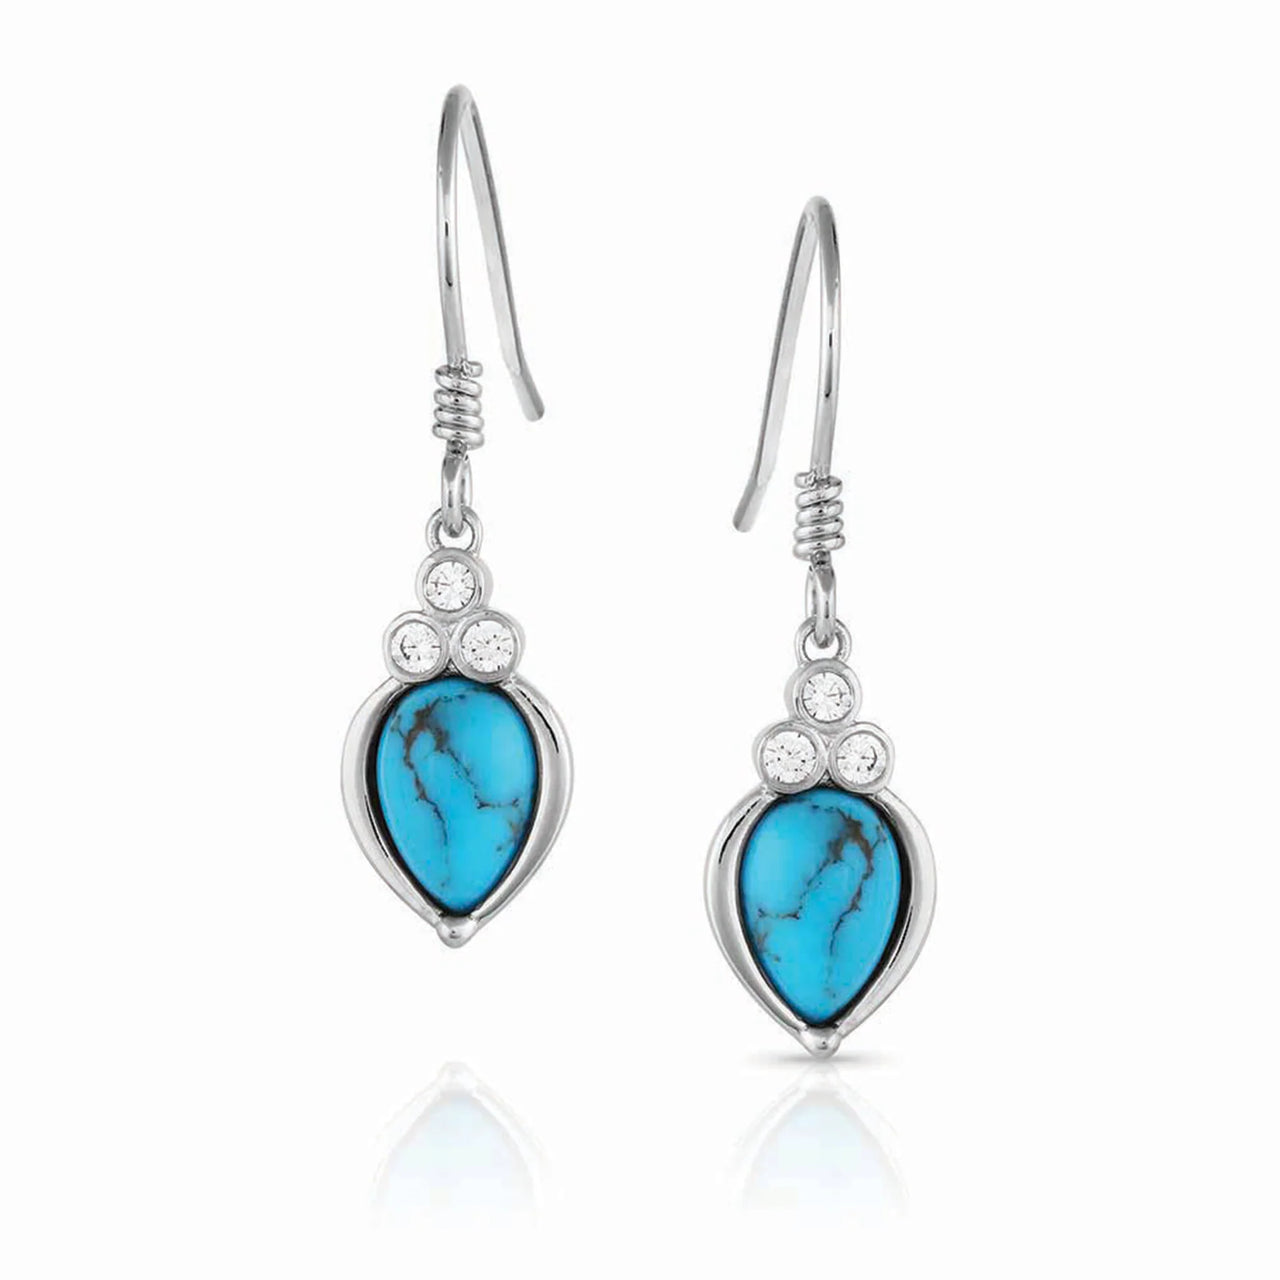 Montana Silversmiths Earrings - The Trading Stables